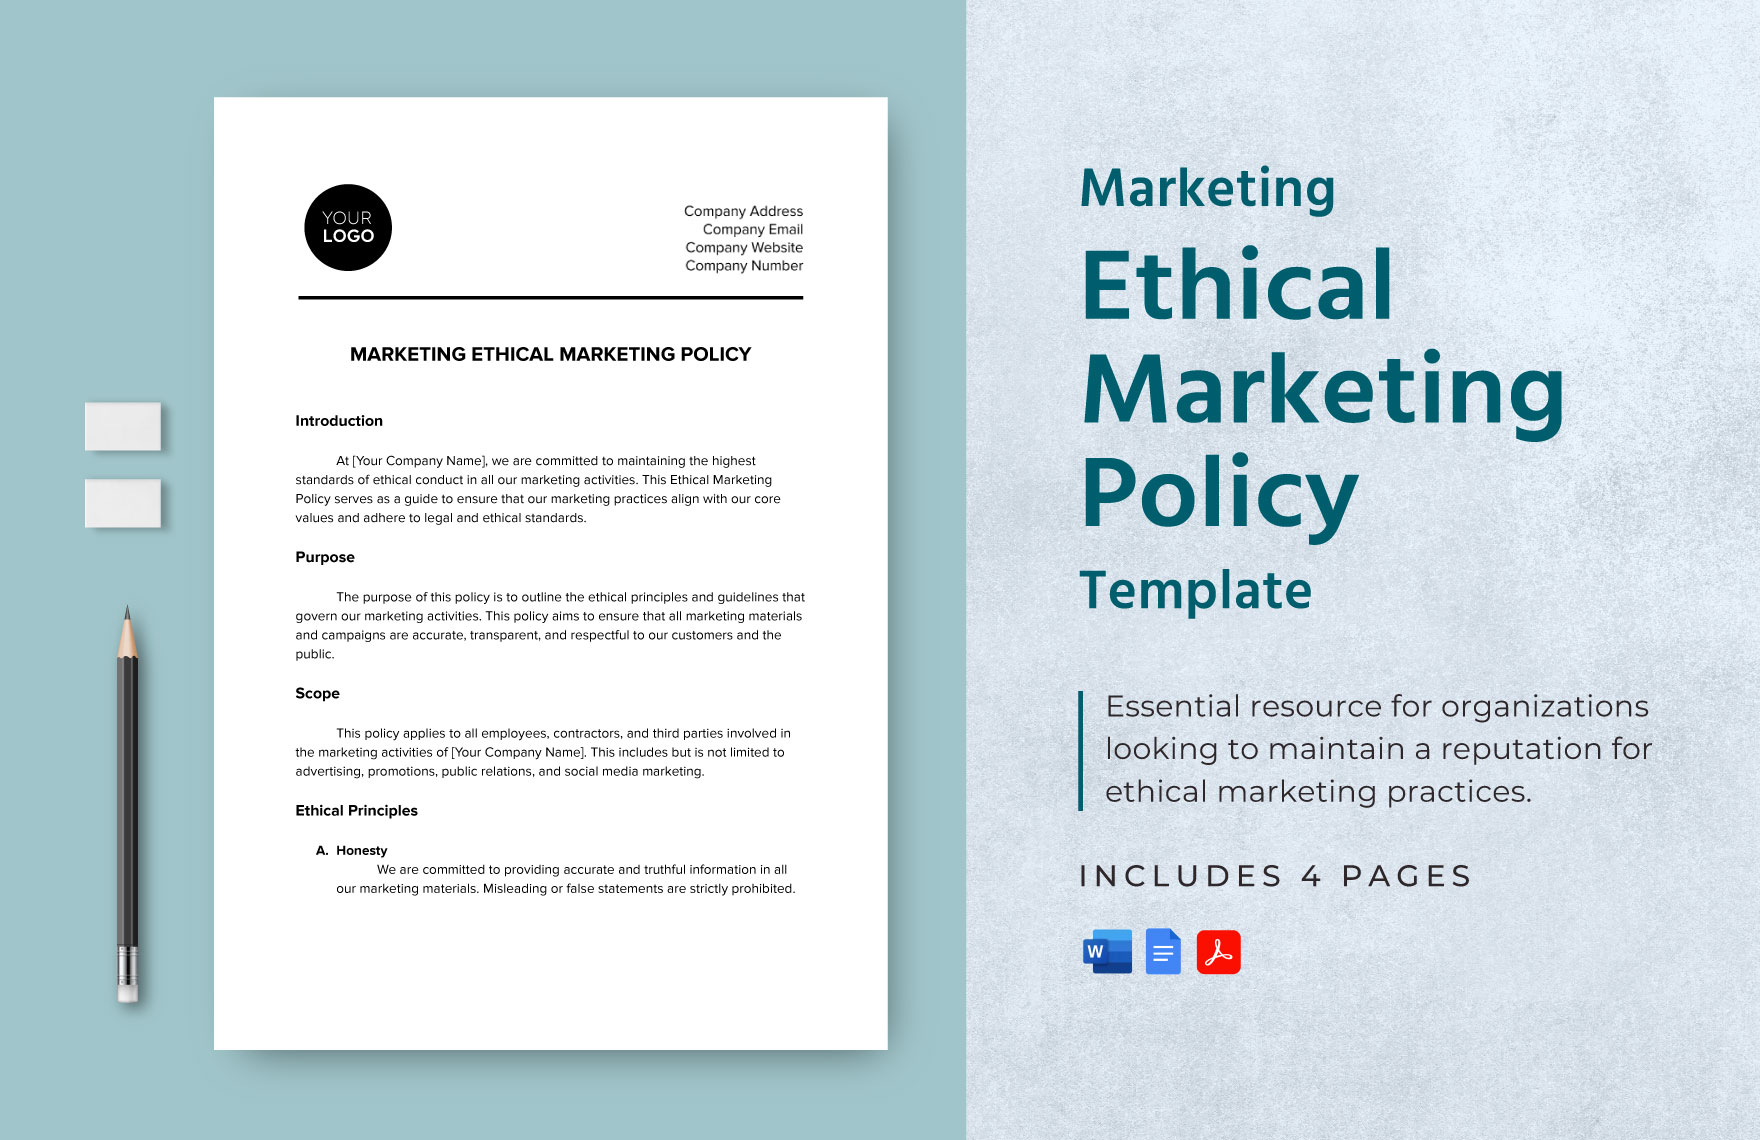 Marketing Ethical Marketing Policy Template in Word, Google Docs, PDF